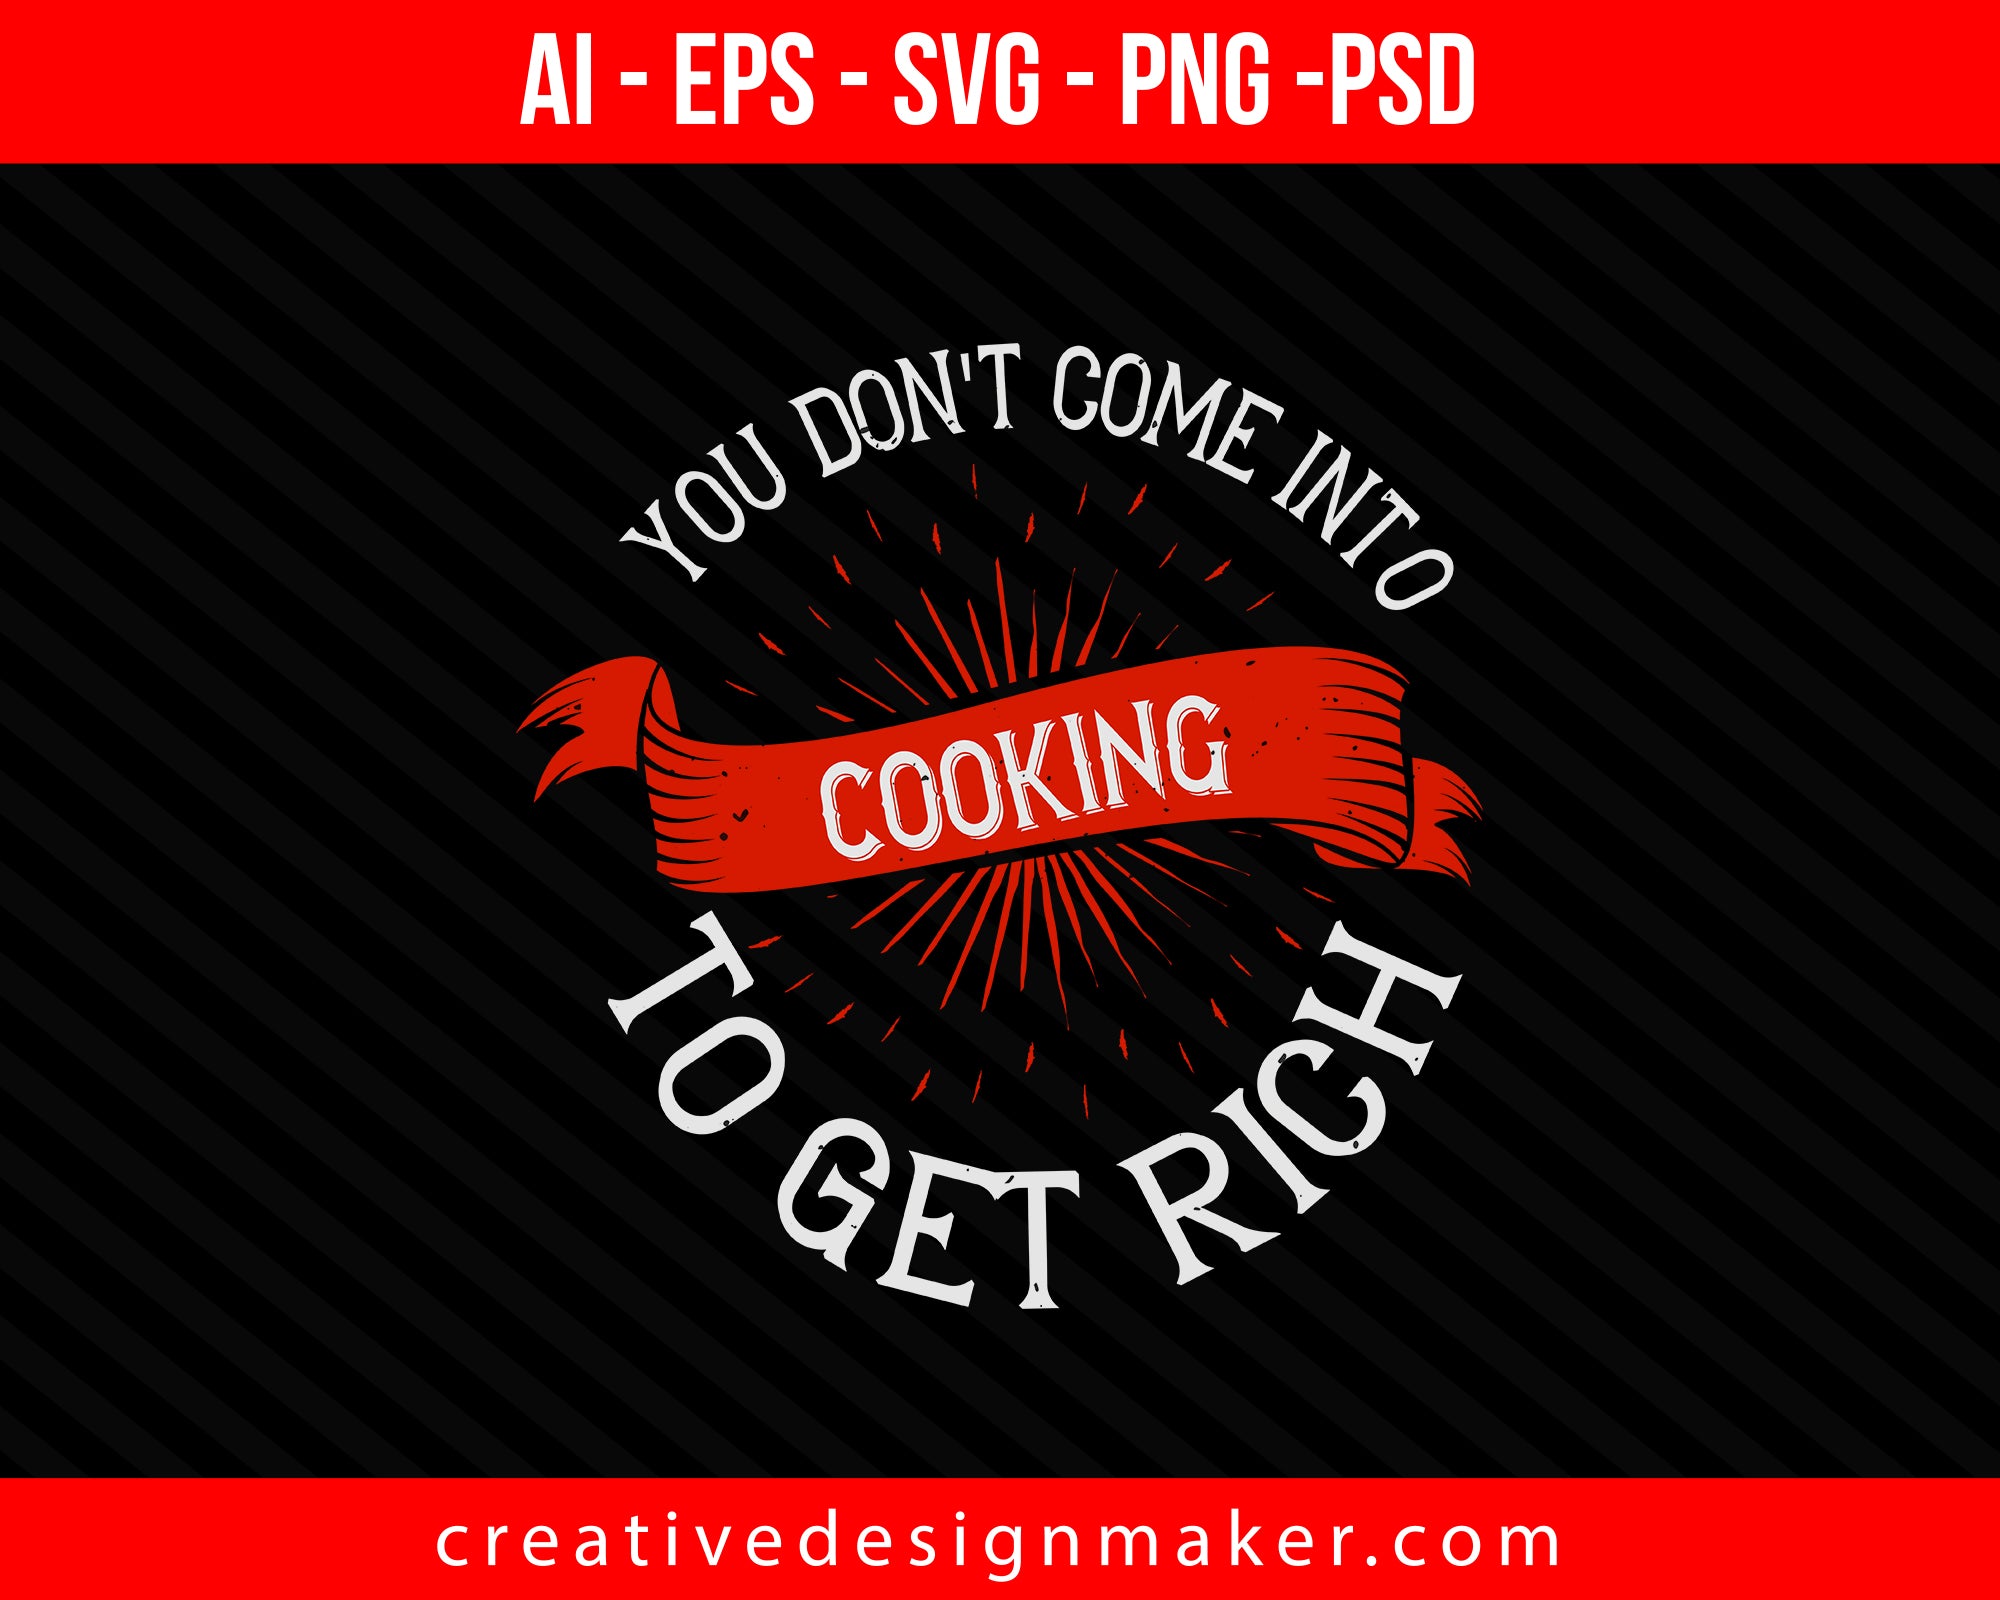 You don't come into cooking to get rich Print Ready Editable T-Shirt SVG Design!